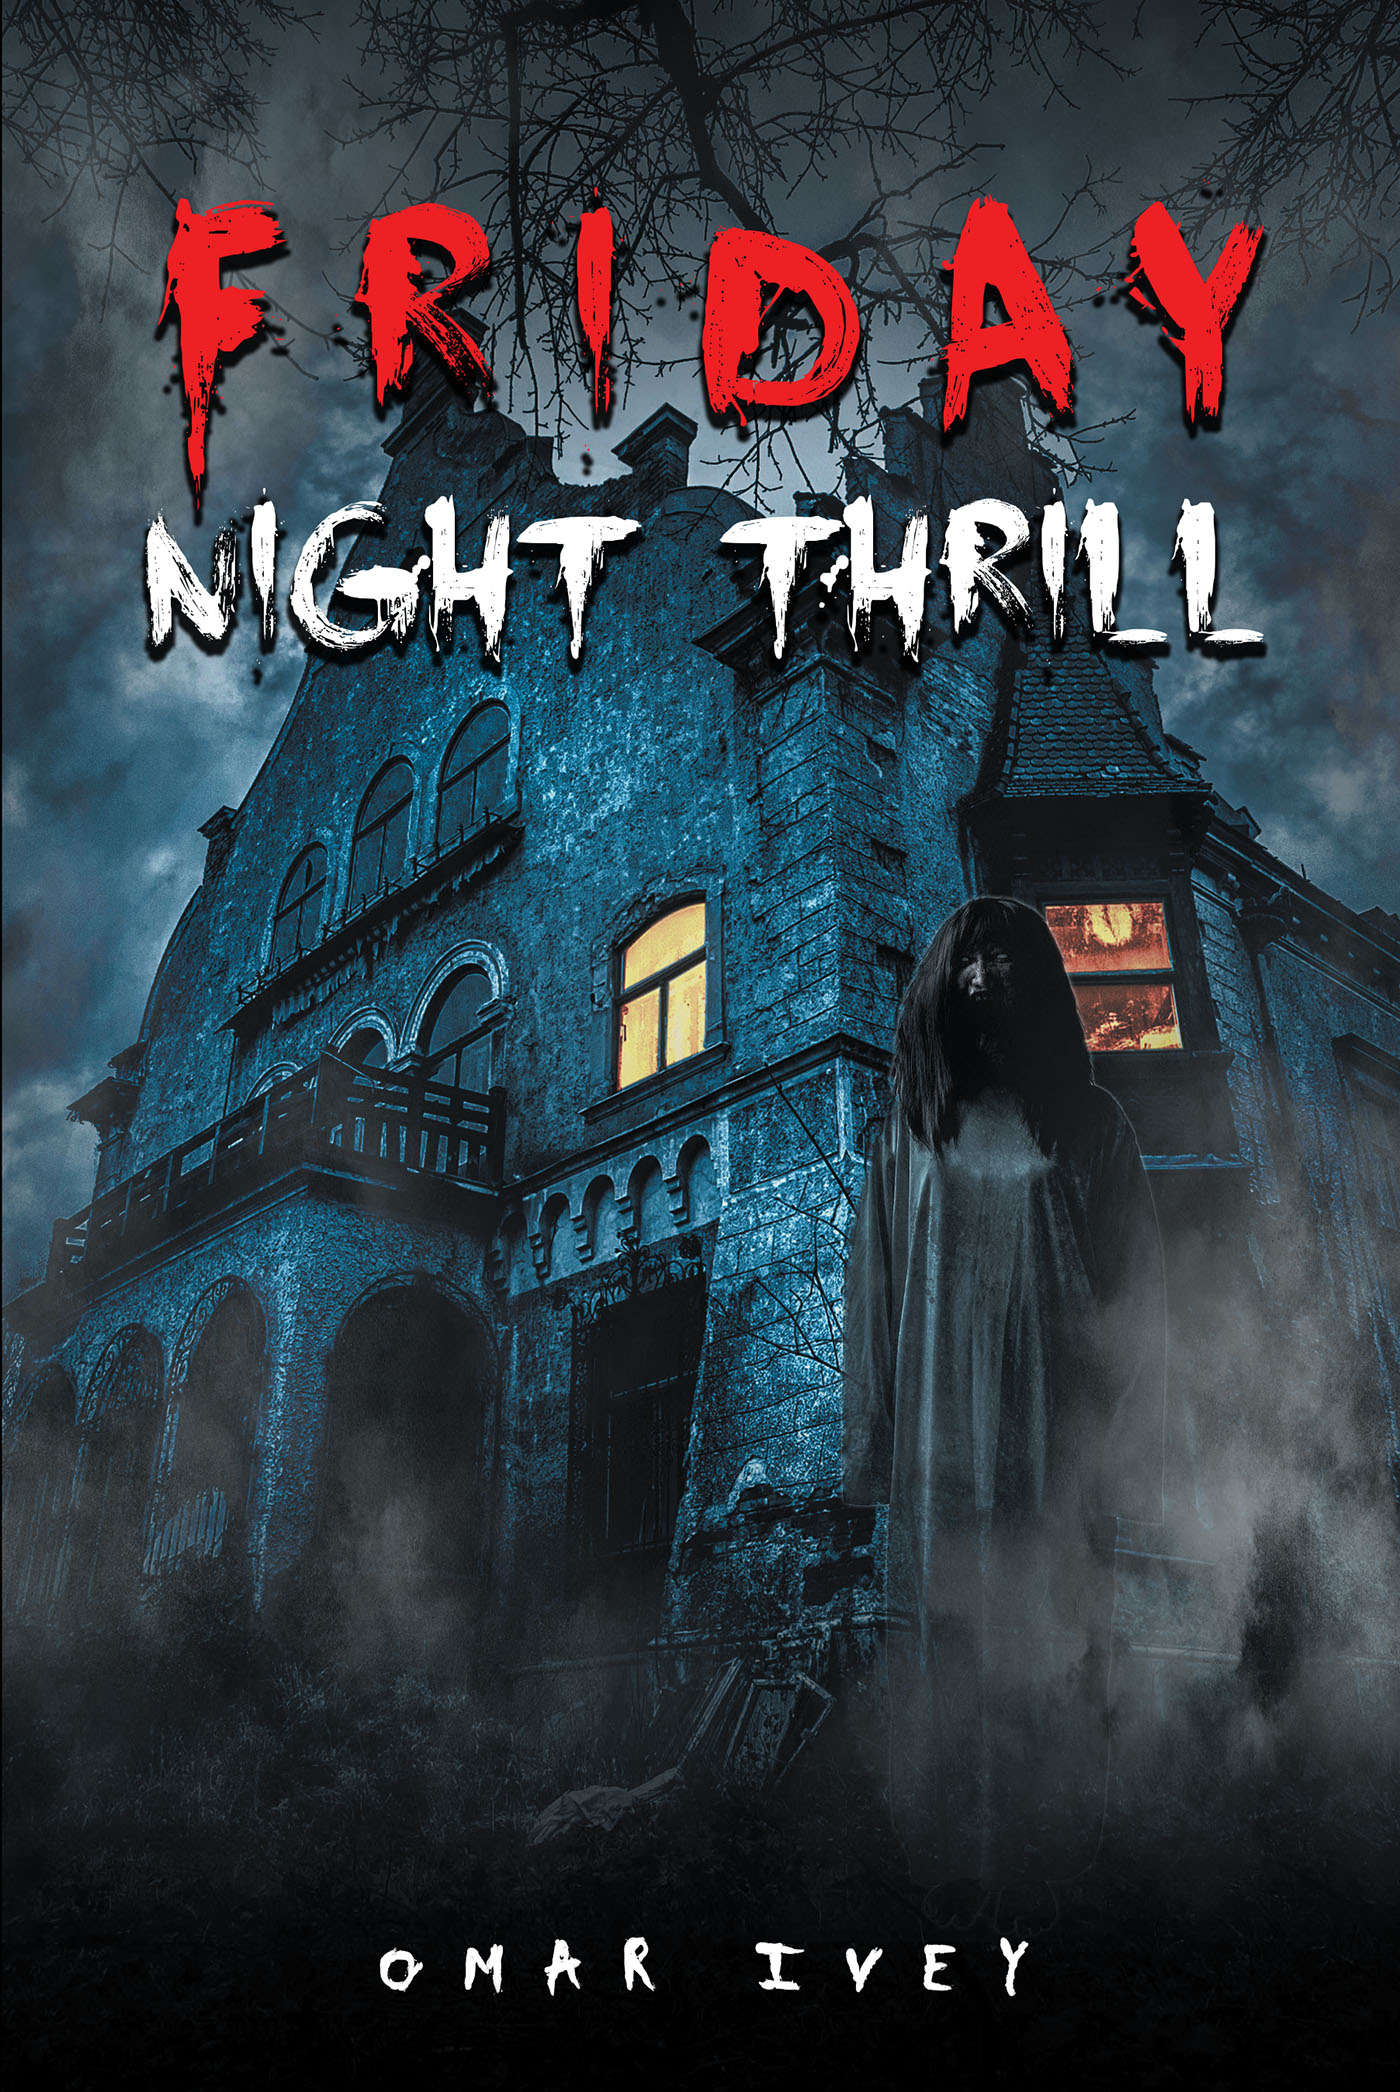 Omar Ivey’s Newly Released "Friday Night Thrill" is a Supernatural Thriller That Will Have Readers Racing to See What Secrets Lie Within a Mysterious Mansion